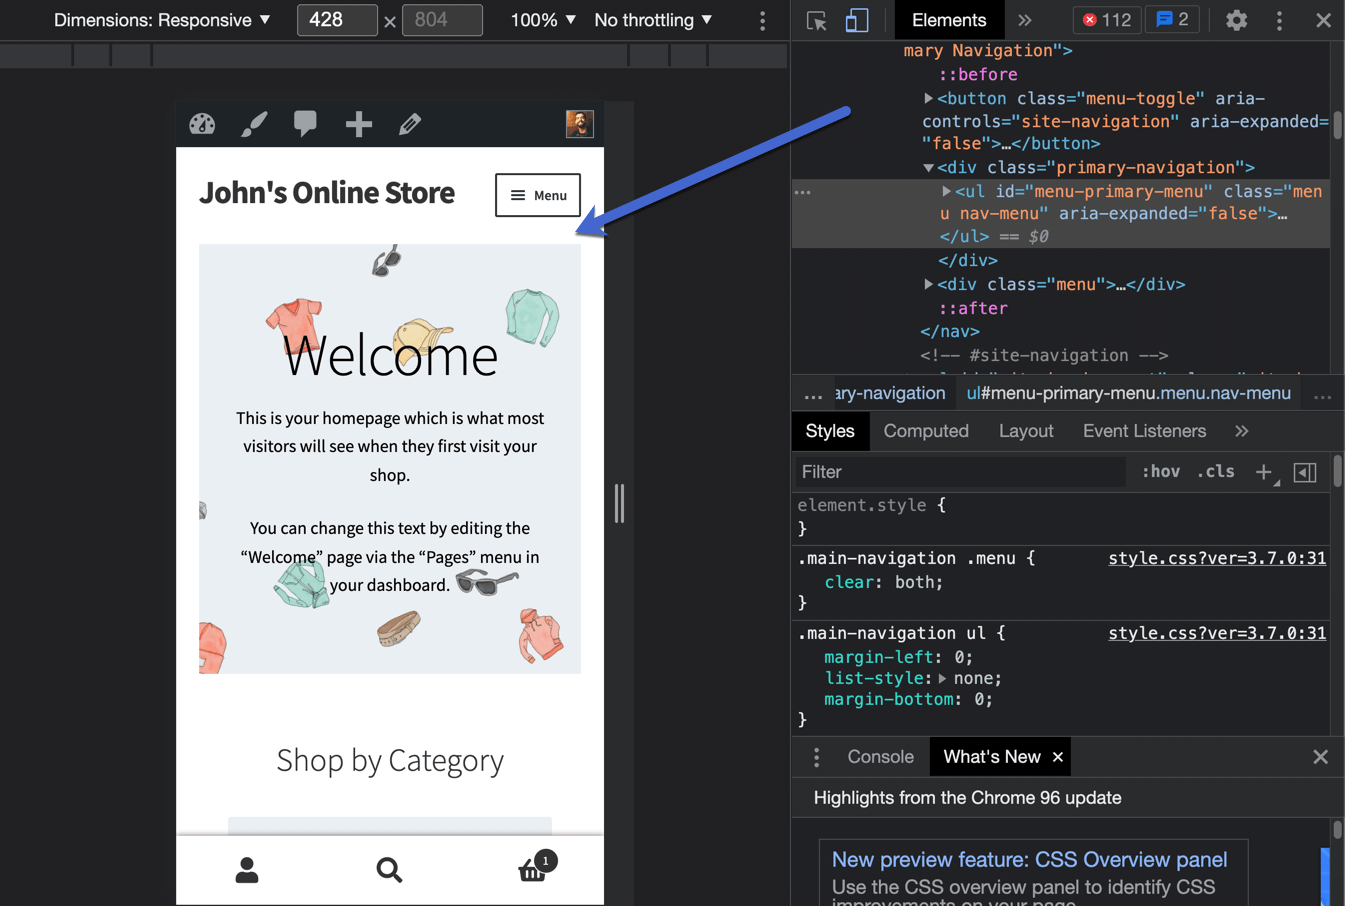 change the dimensions to view mobile version of website